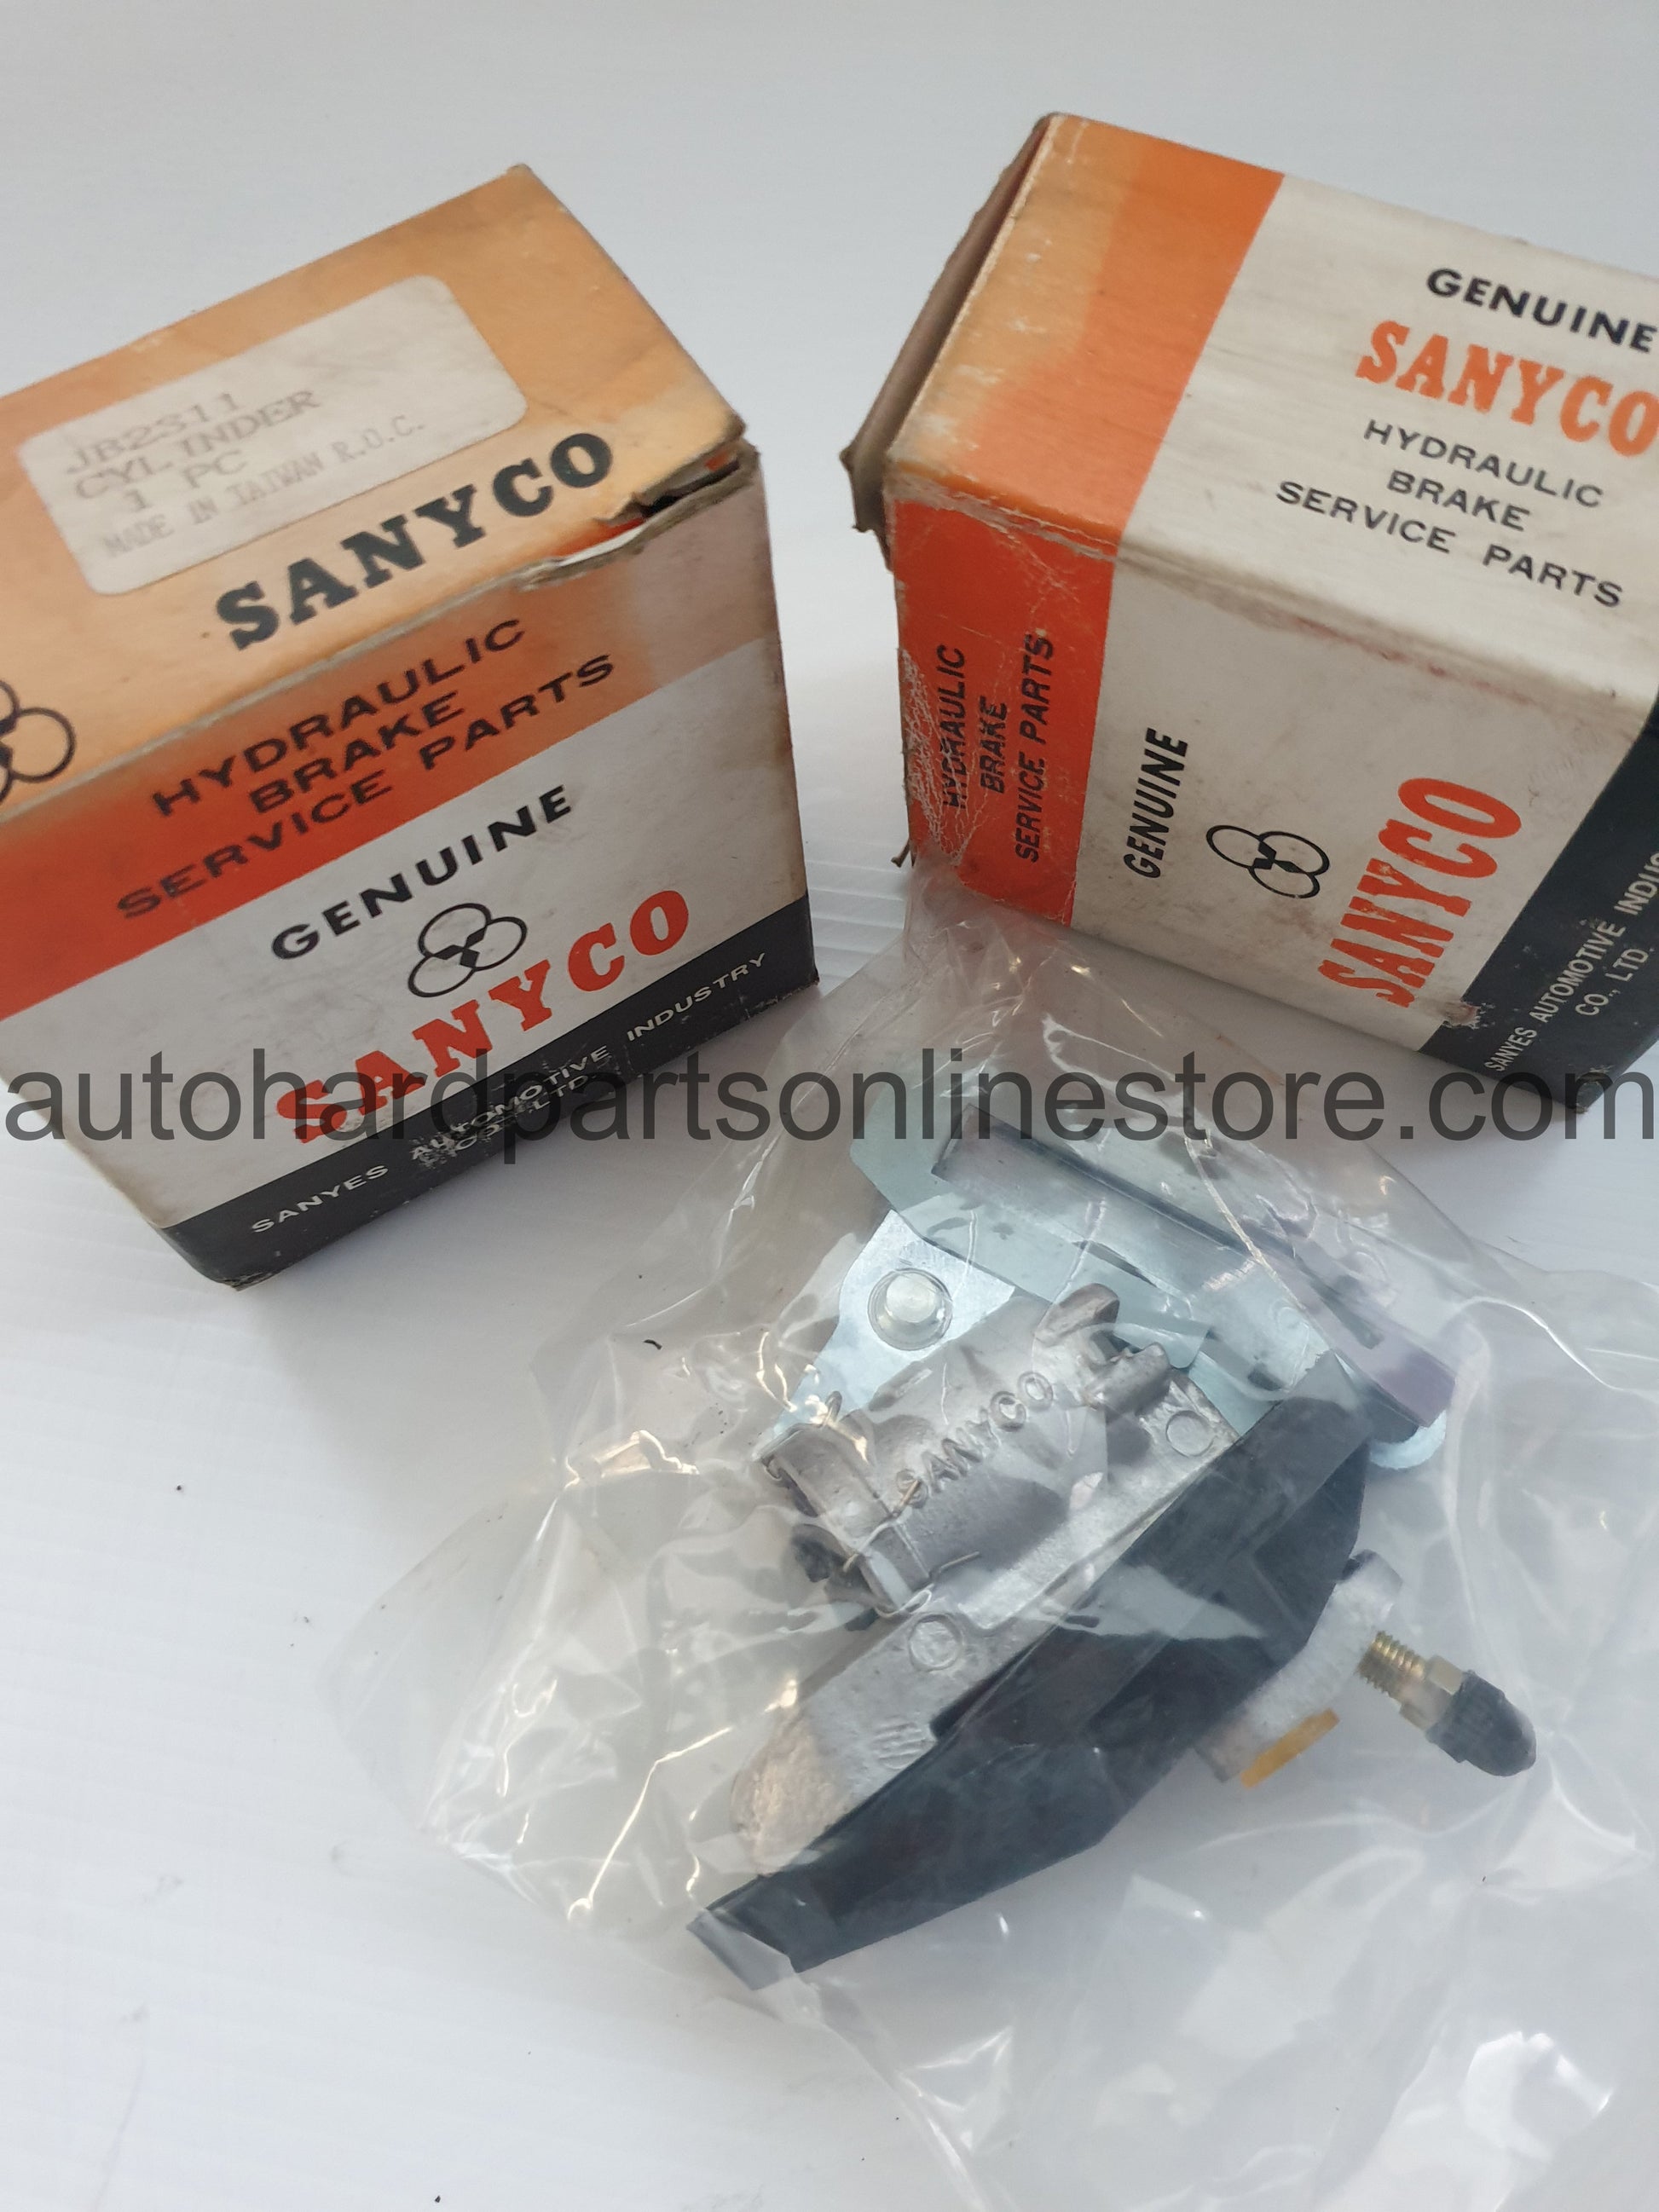 Sanyco wheel cylinder assembly